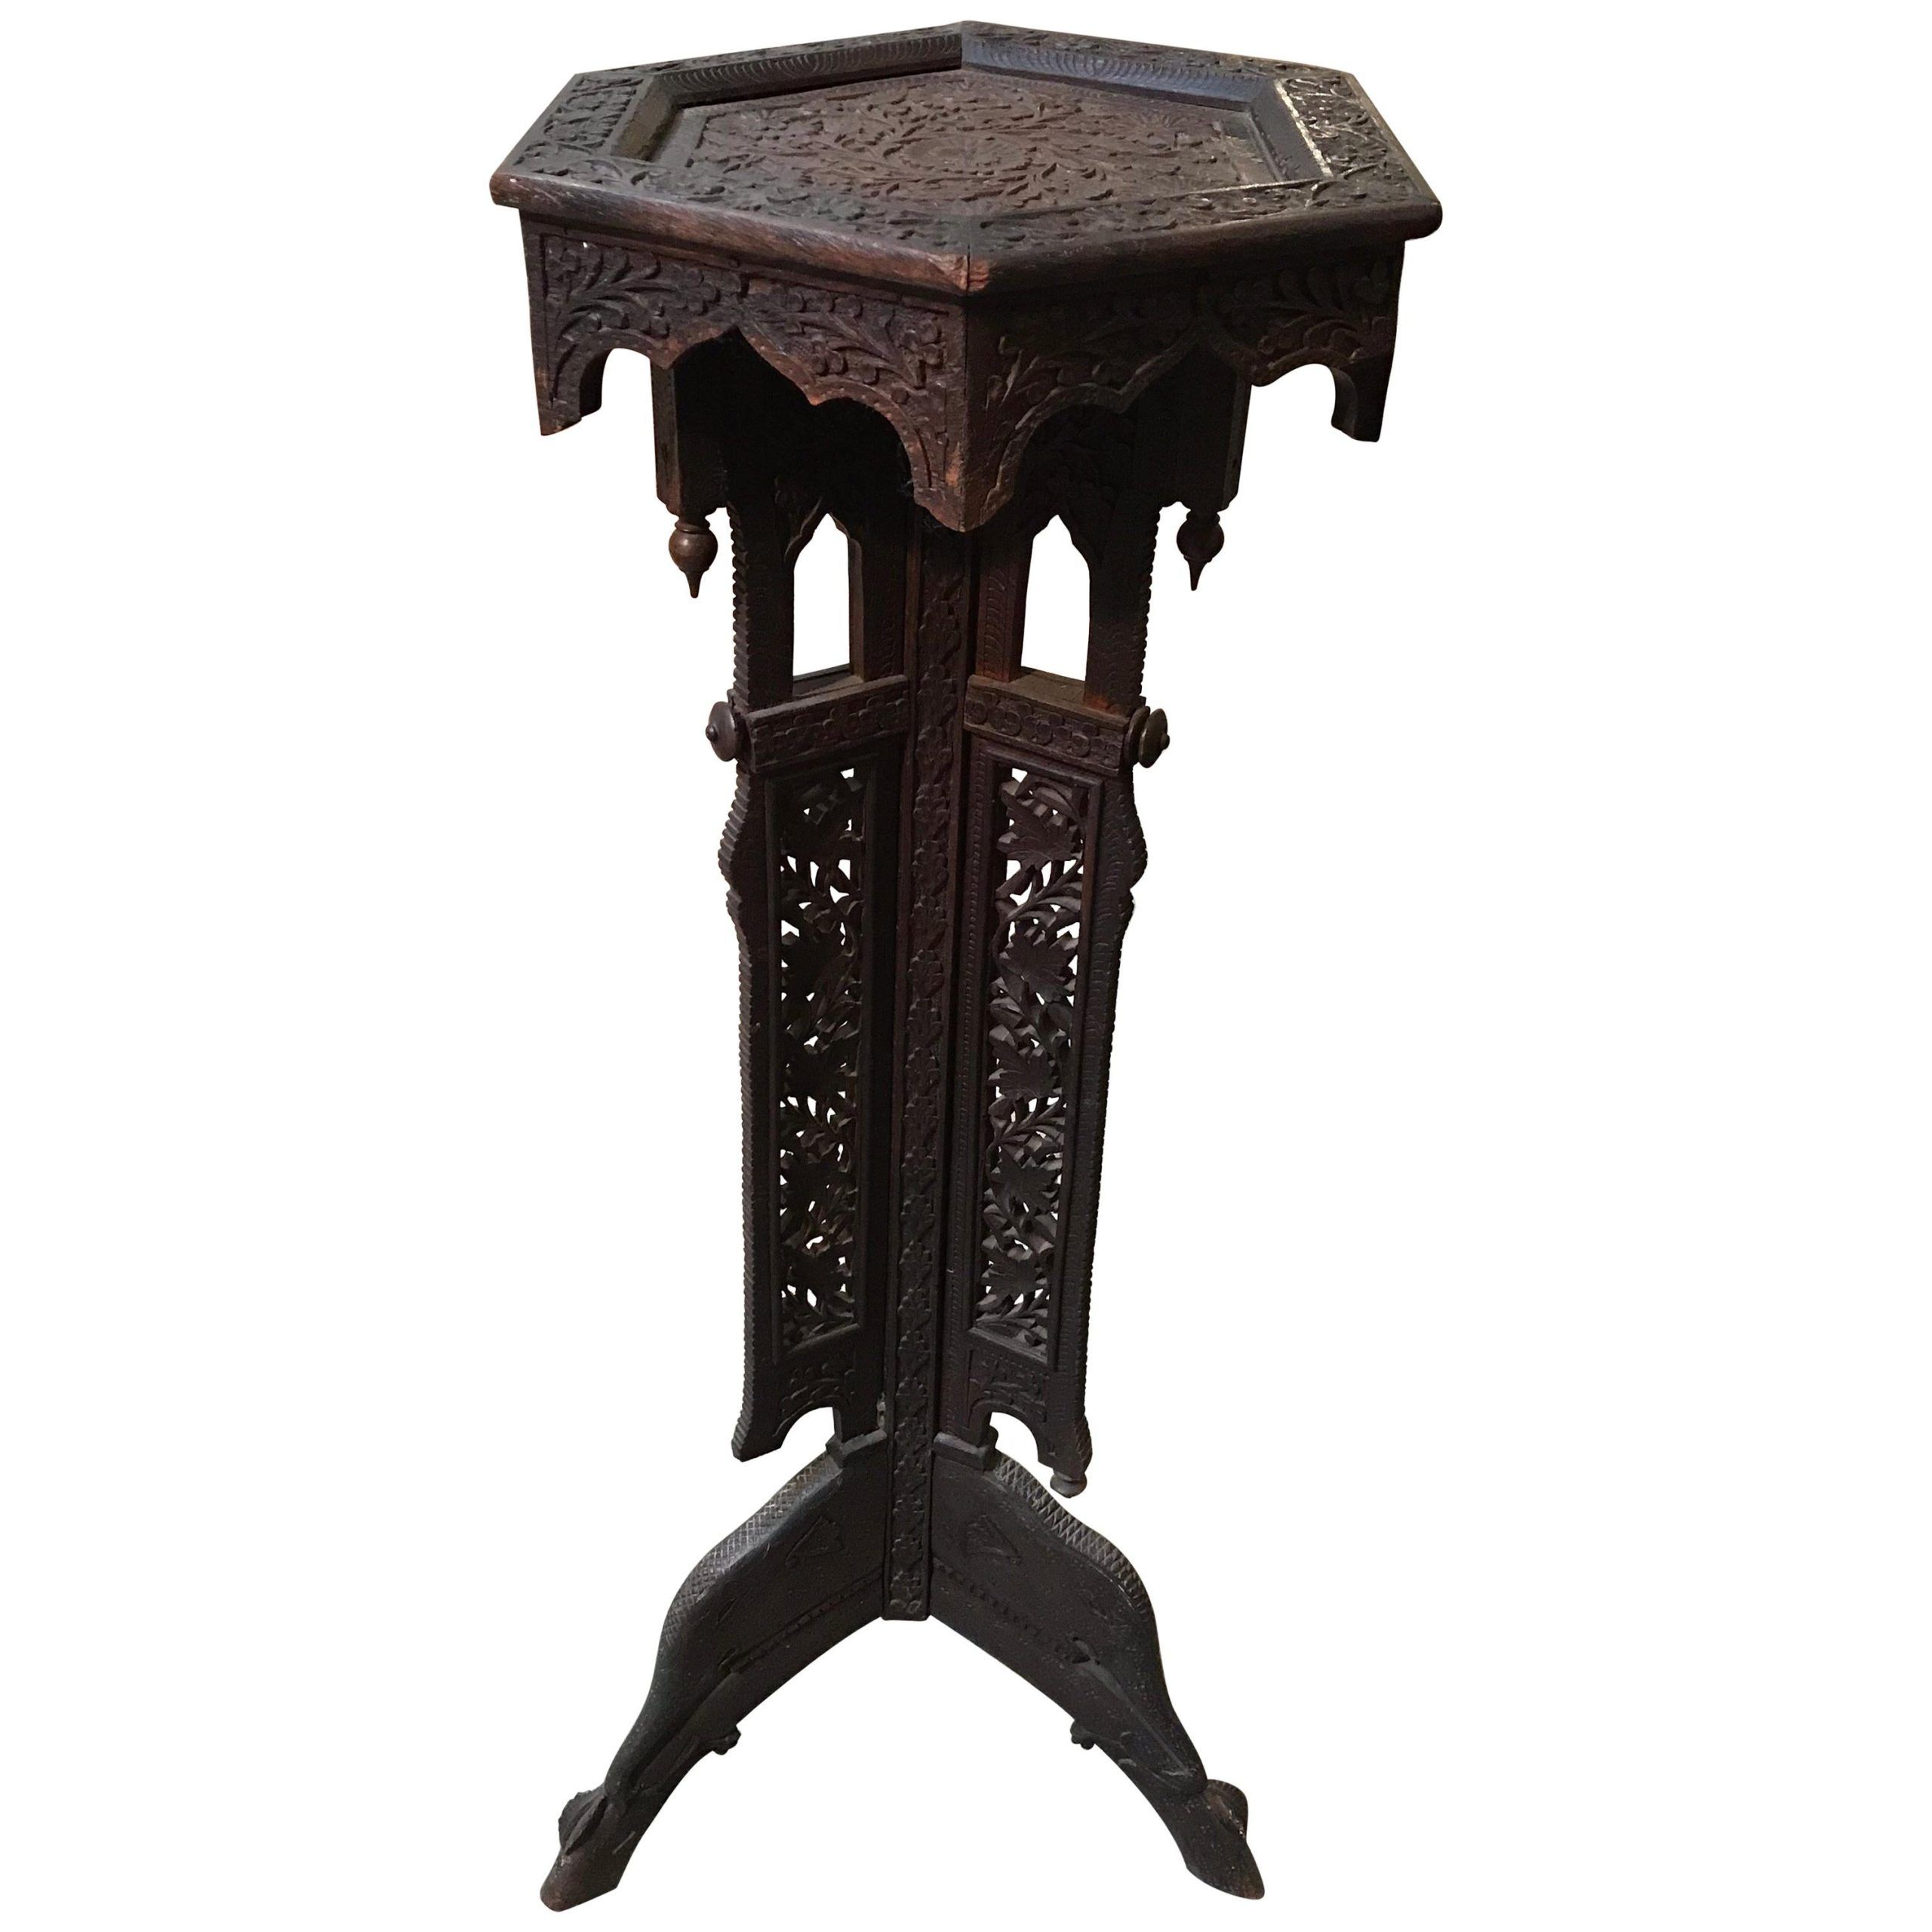 Widely Used Carved Plant Stands Intended For Carved Wooden Indian Plant Stand For Sale At 1stdibs (View 8 of 10)